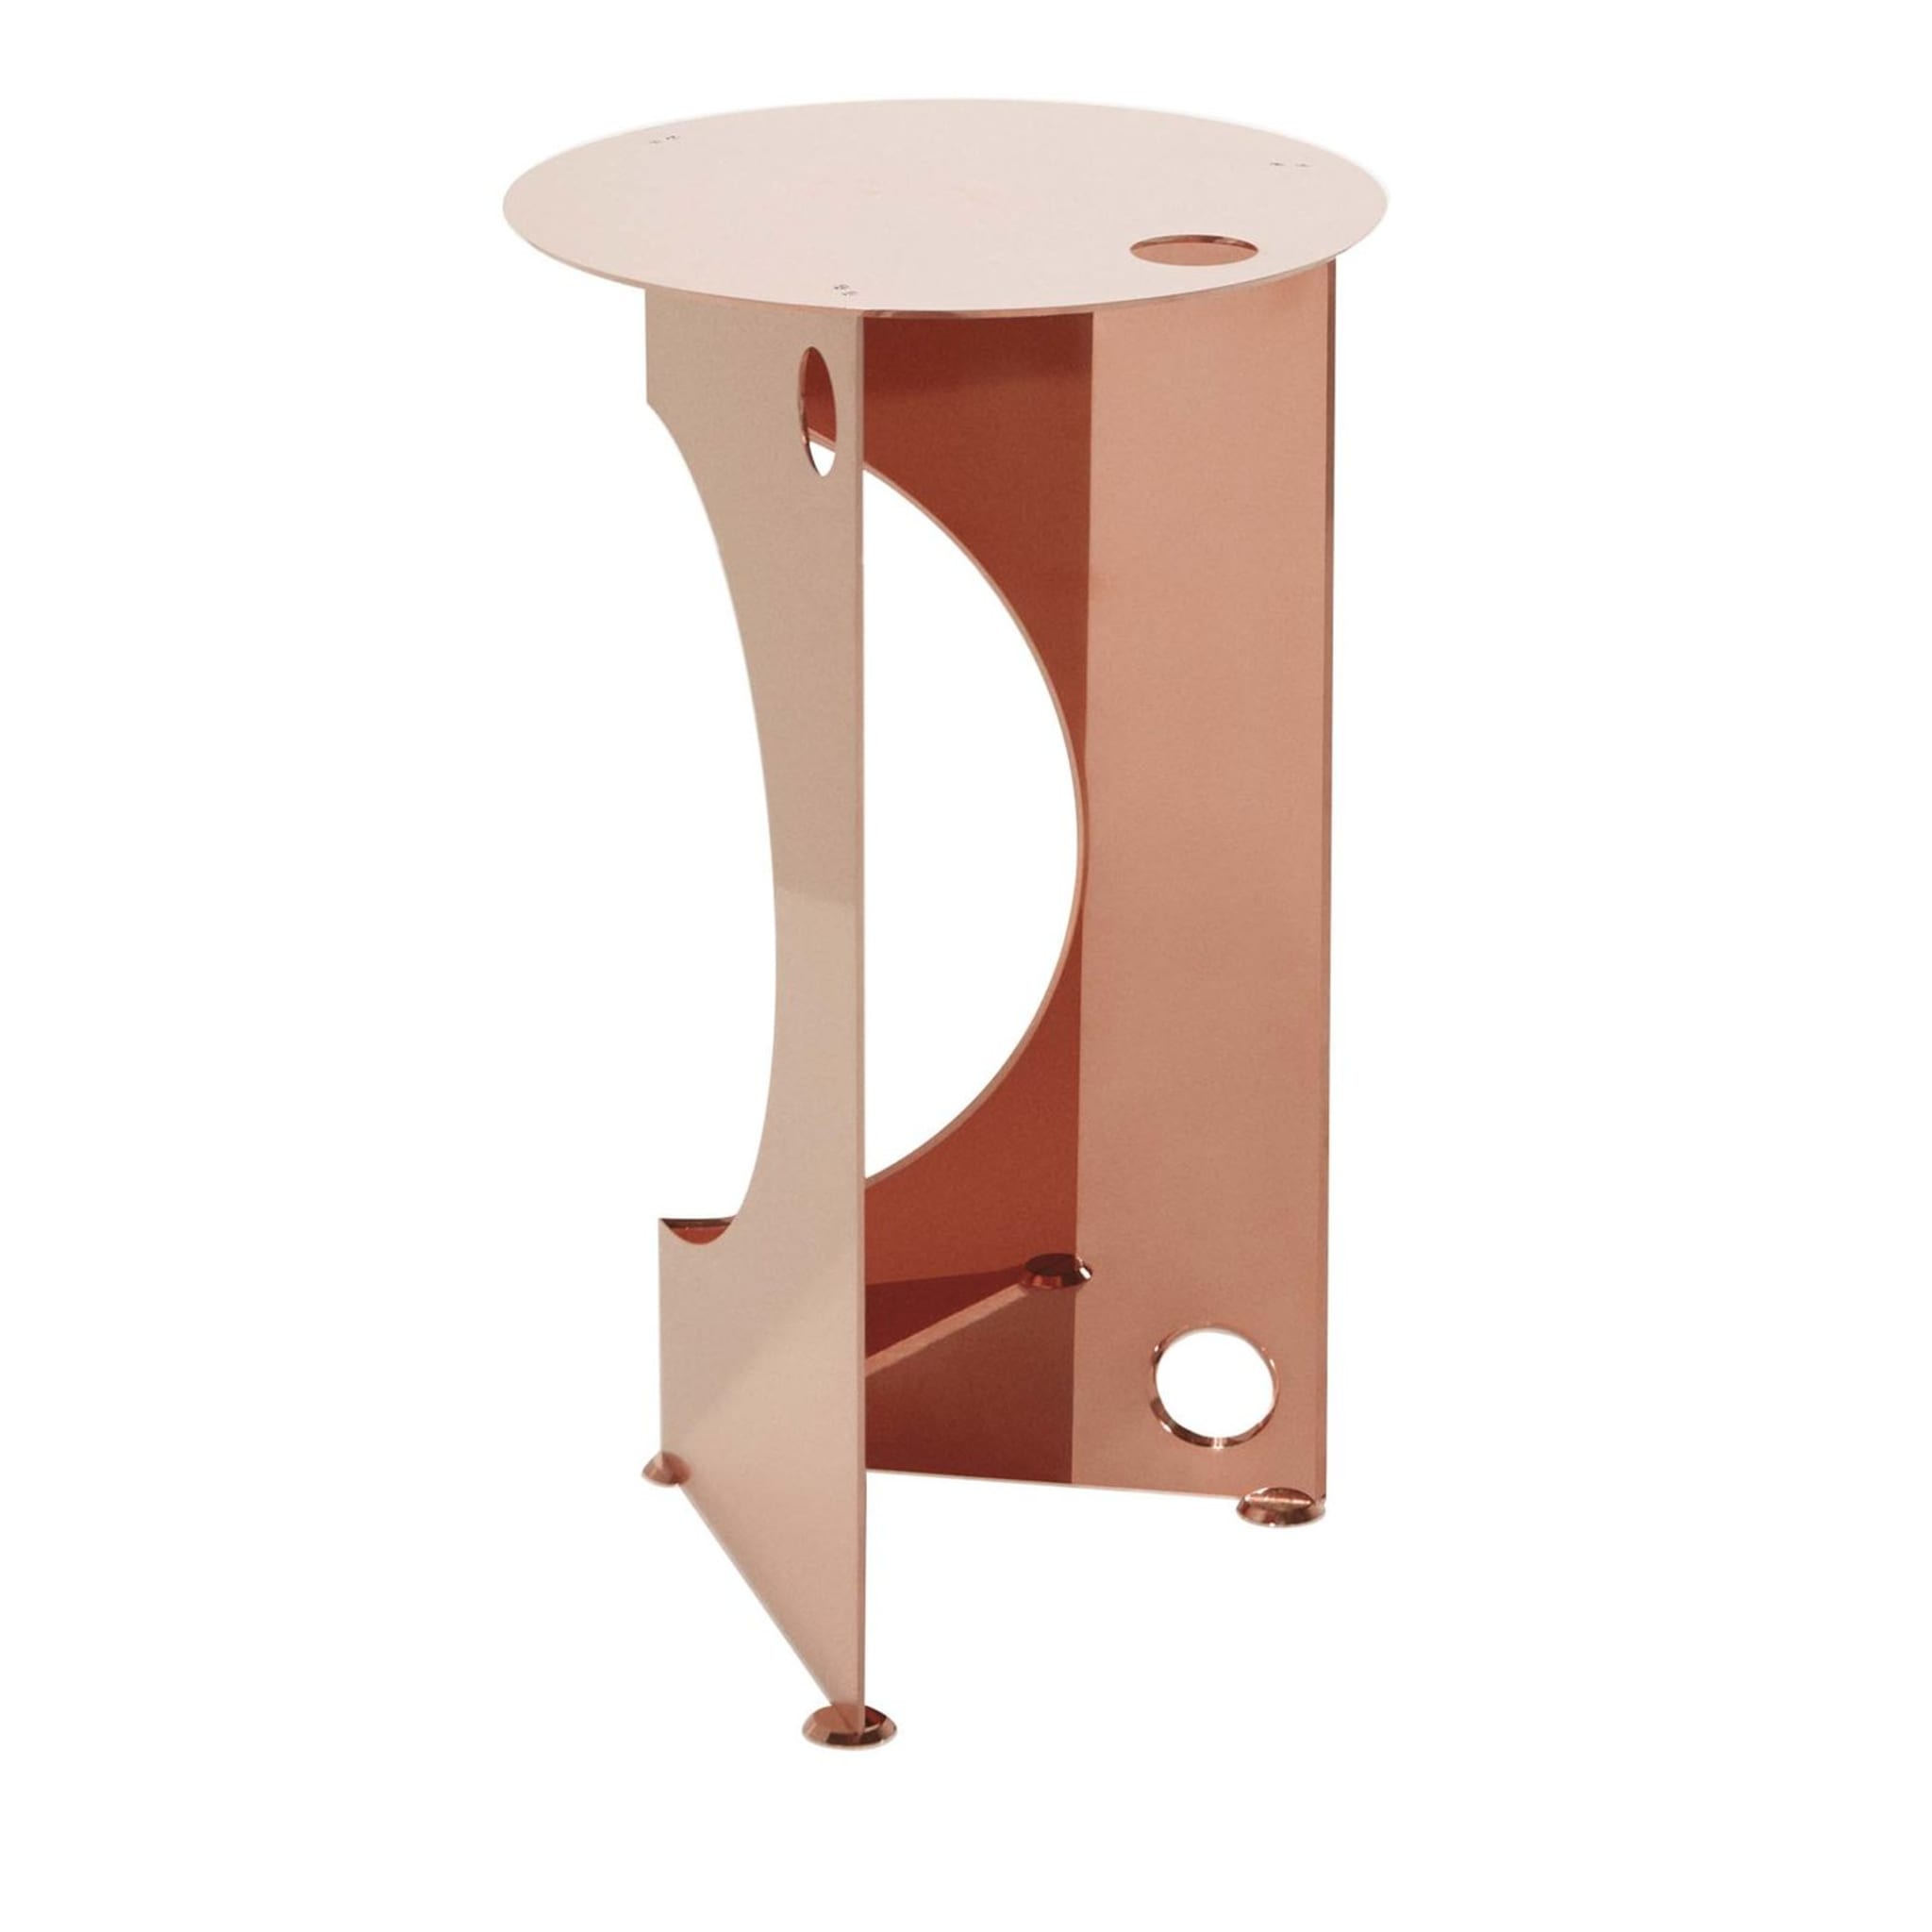 One Side Table in Copper - Main view